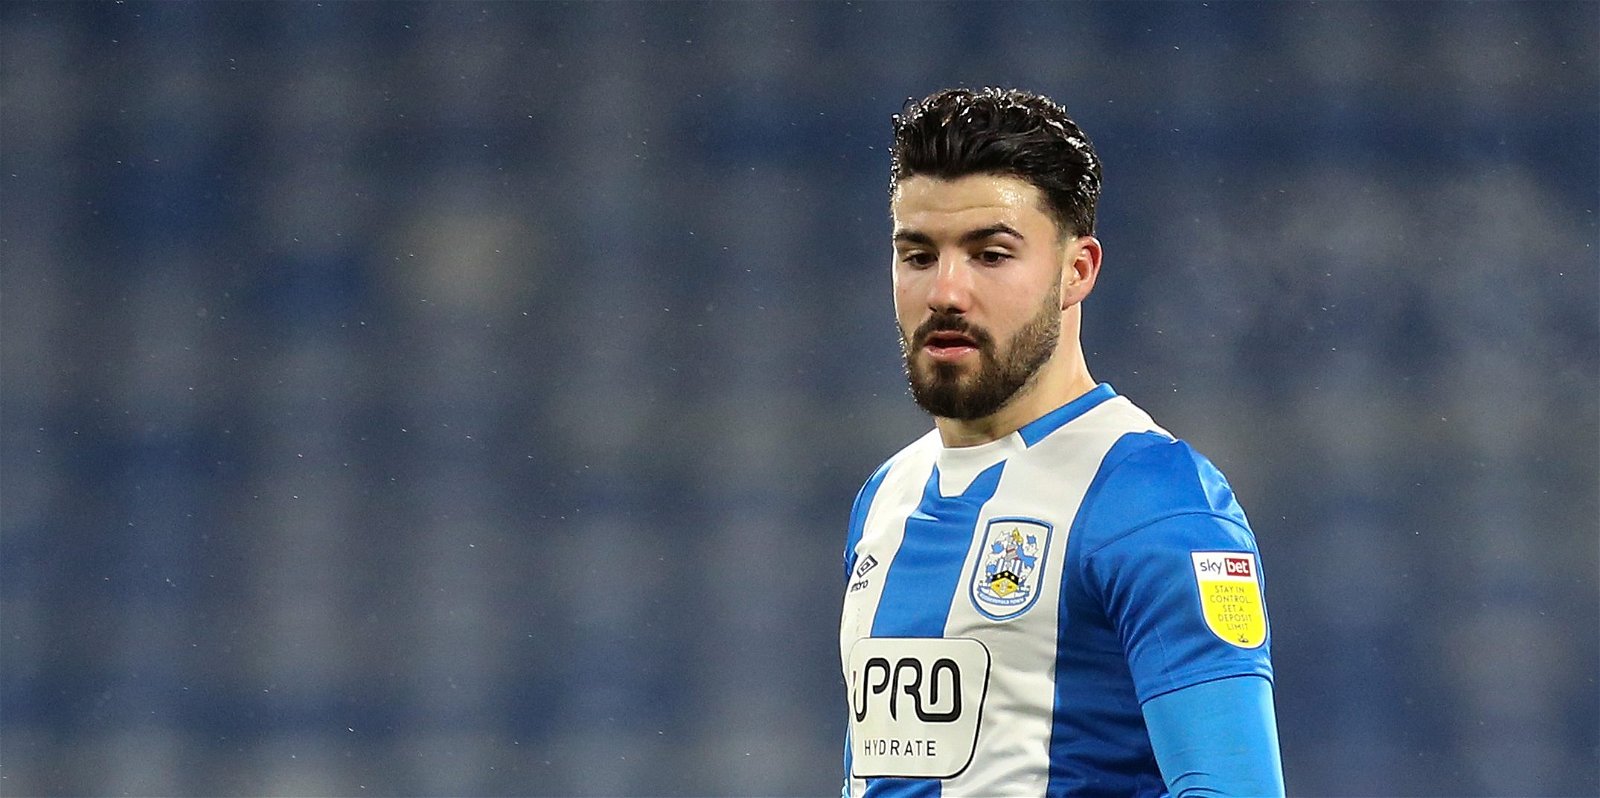 Huddersfield, 3 Huddersfield Town players who struggled in Reading defeat